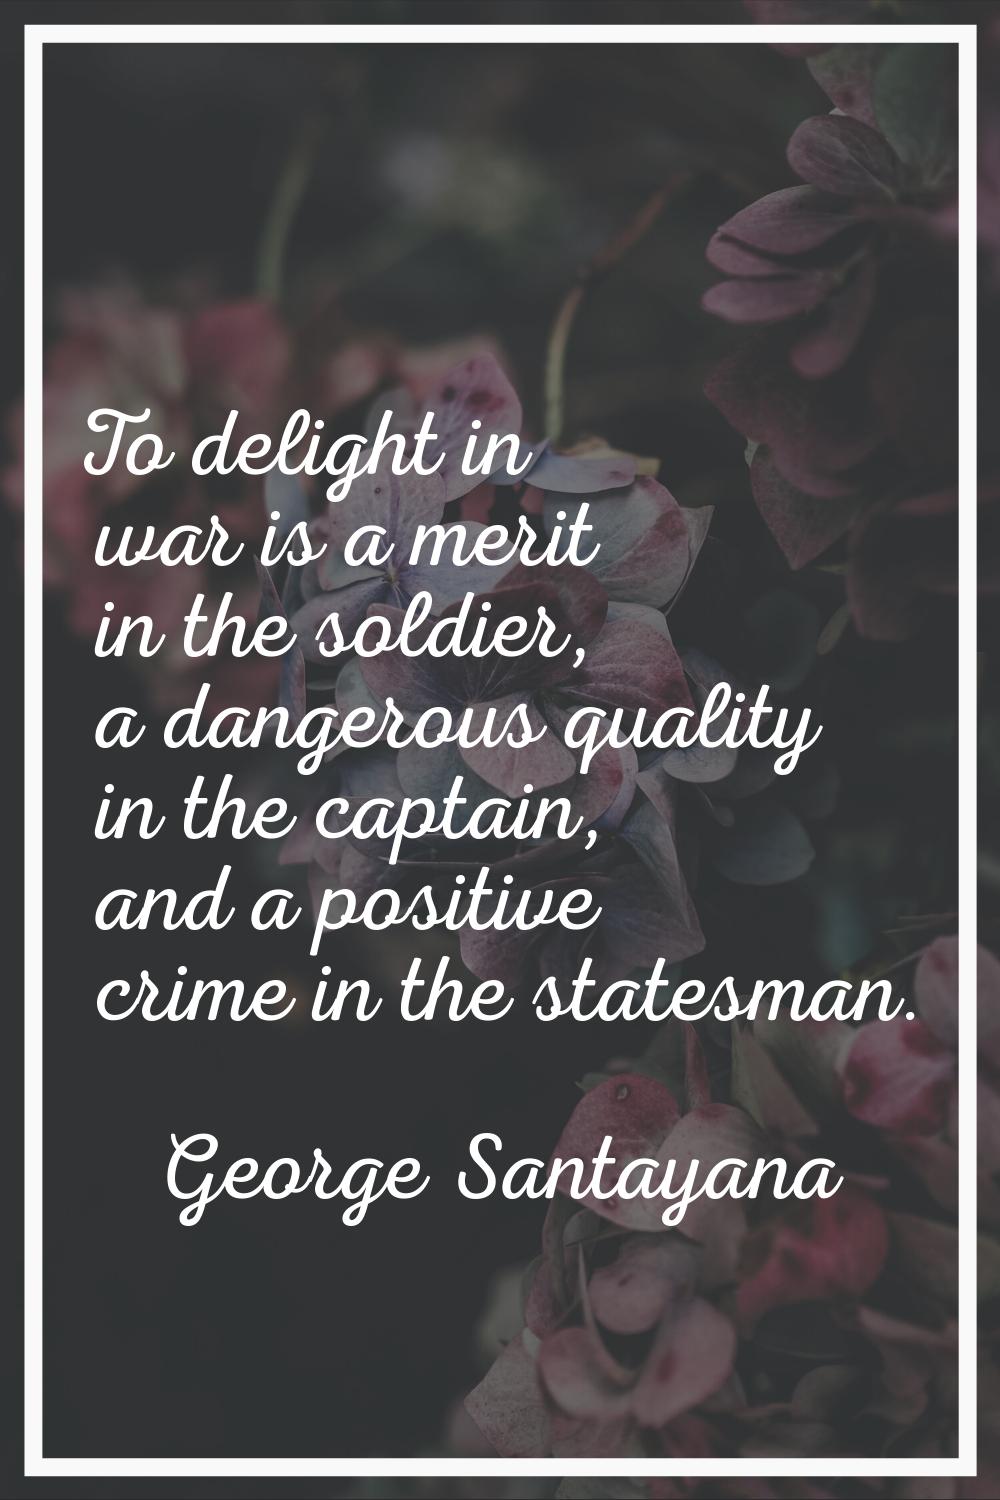 To delight in war is a merit in the soldier, a dangerous quality in the captain, and a positive cri